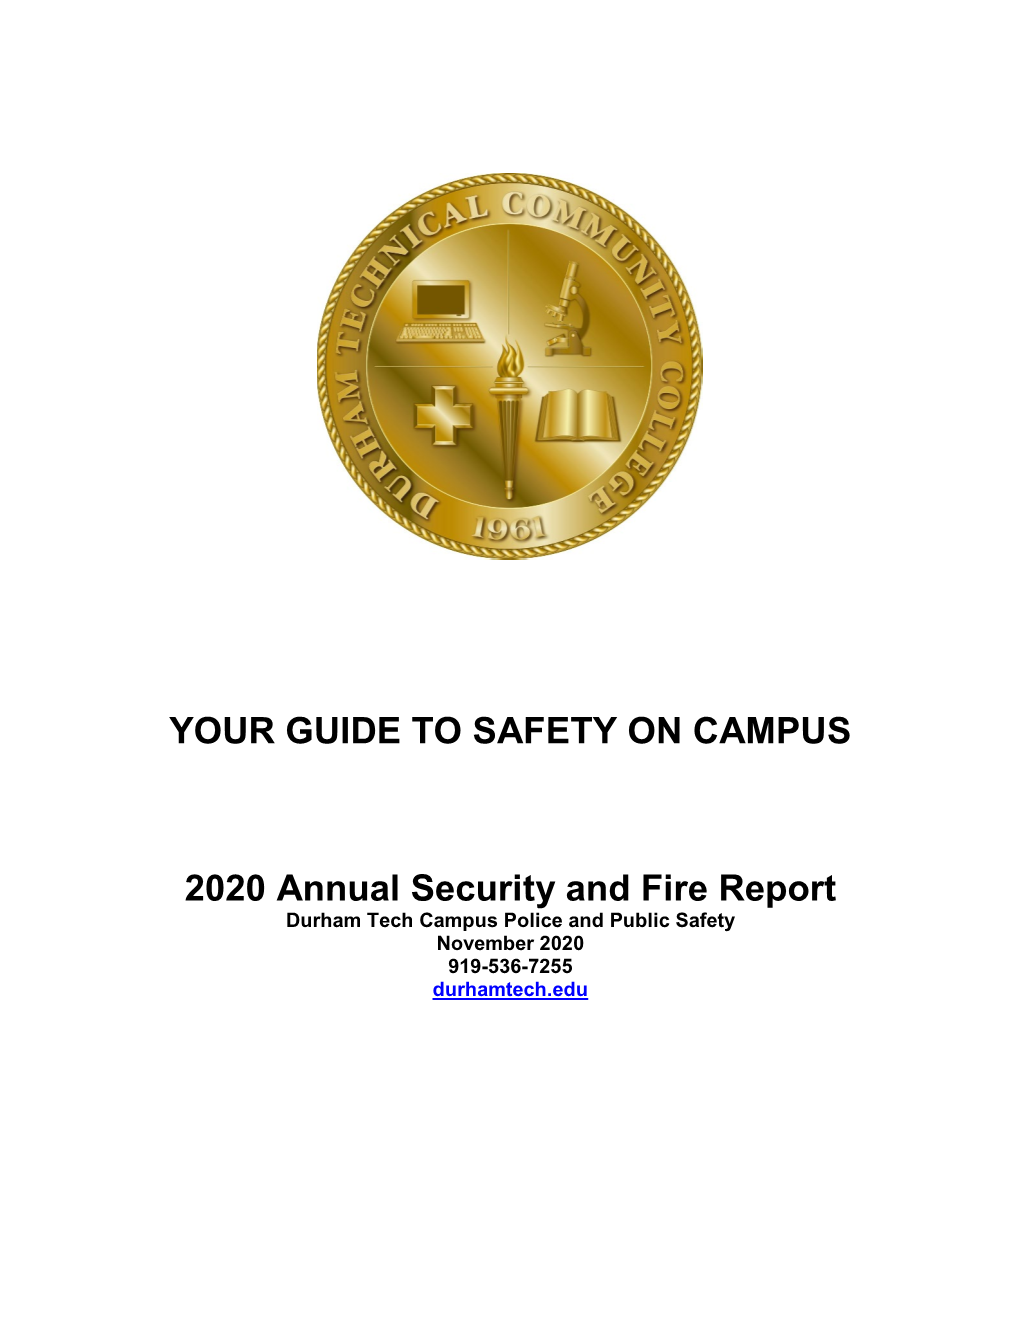 2020 Annual Security and Fire Report Durham Tech Campus Police and Public Safety November 2020 919-536-7255 Durhamtech.Edu 2020 Annual Security and Fire Report